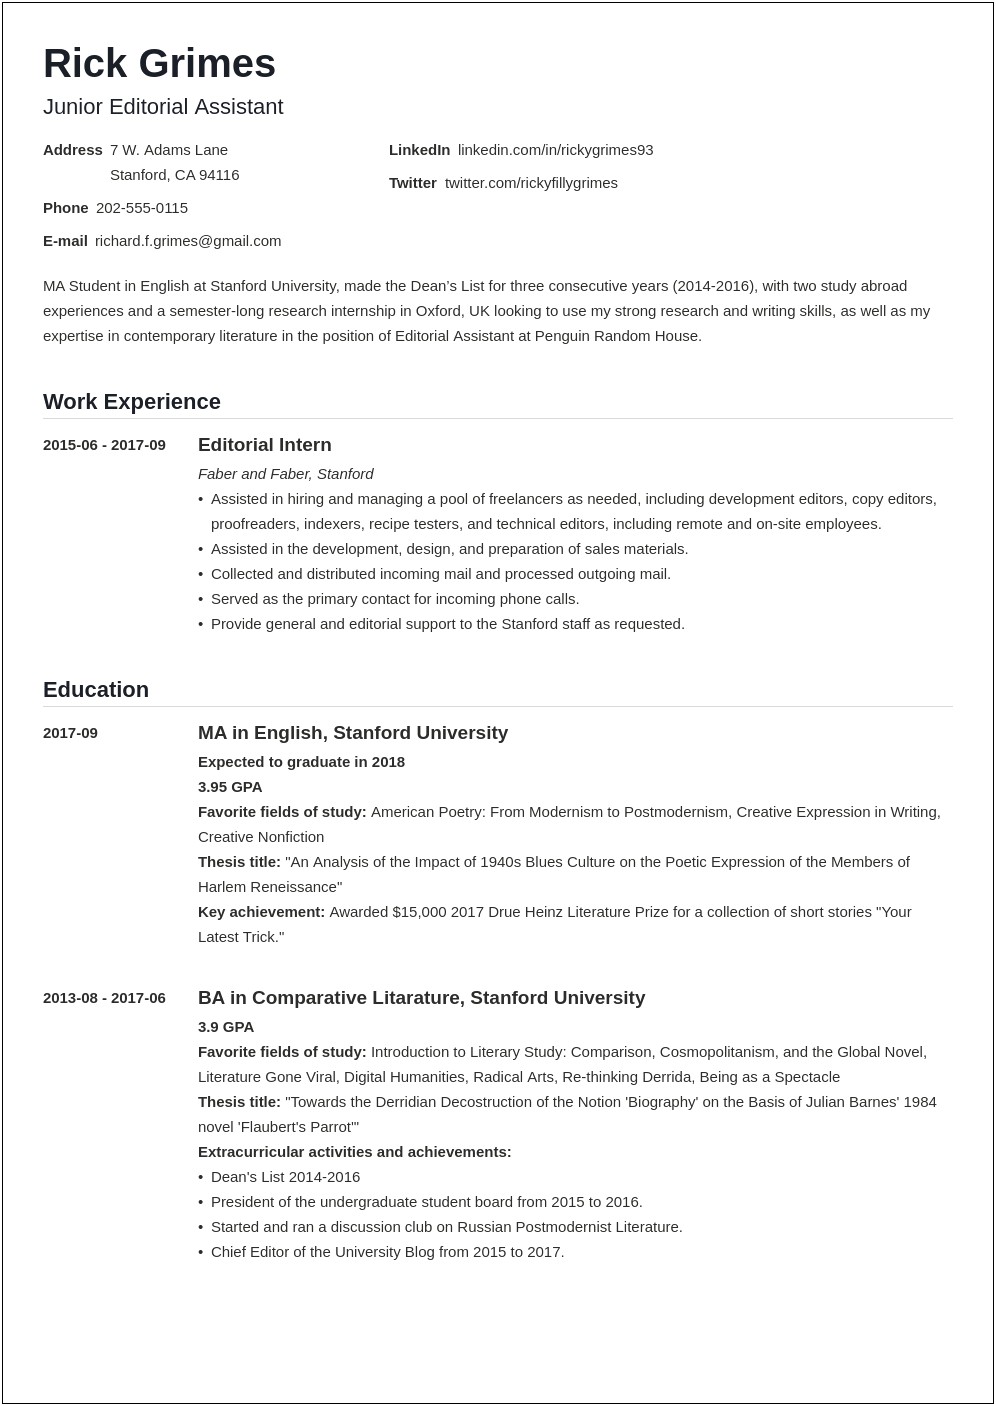 Resume Objective Examples For Higher Education Job